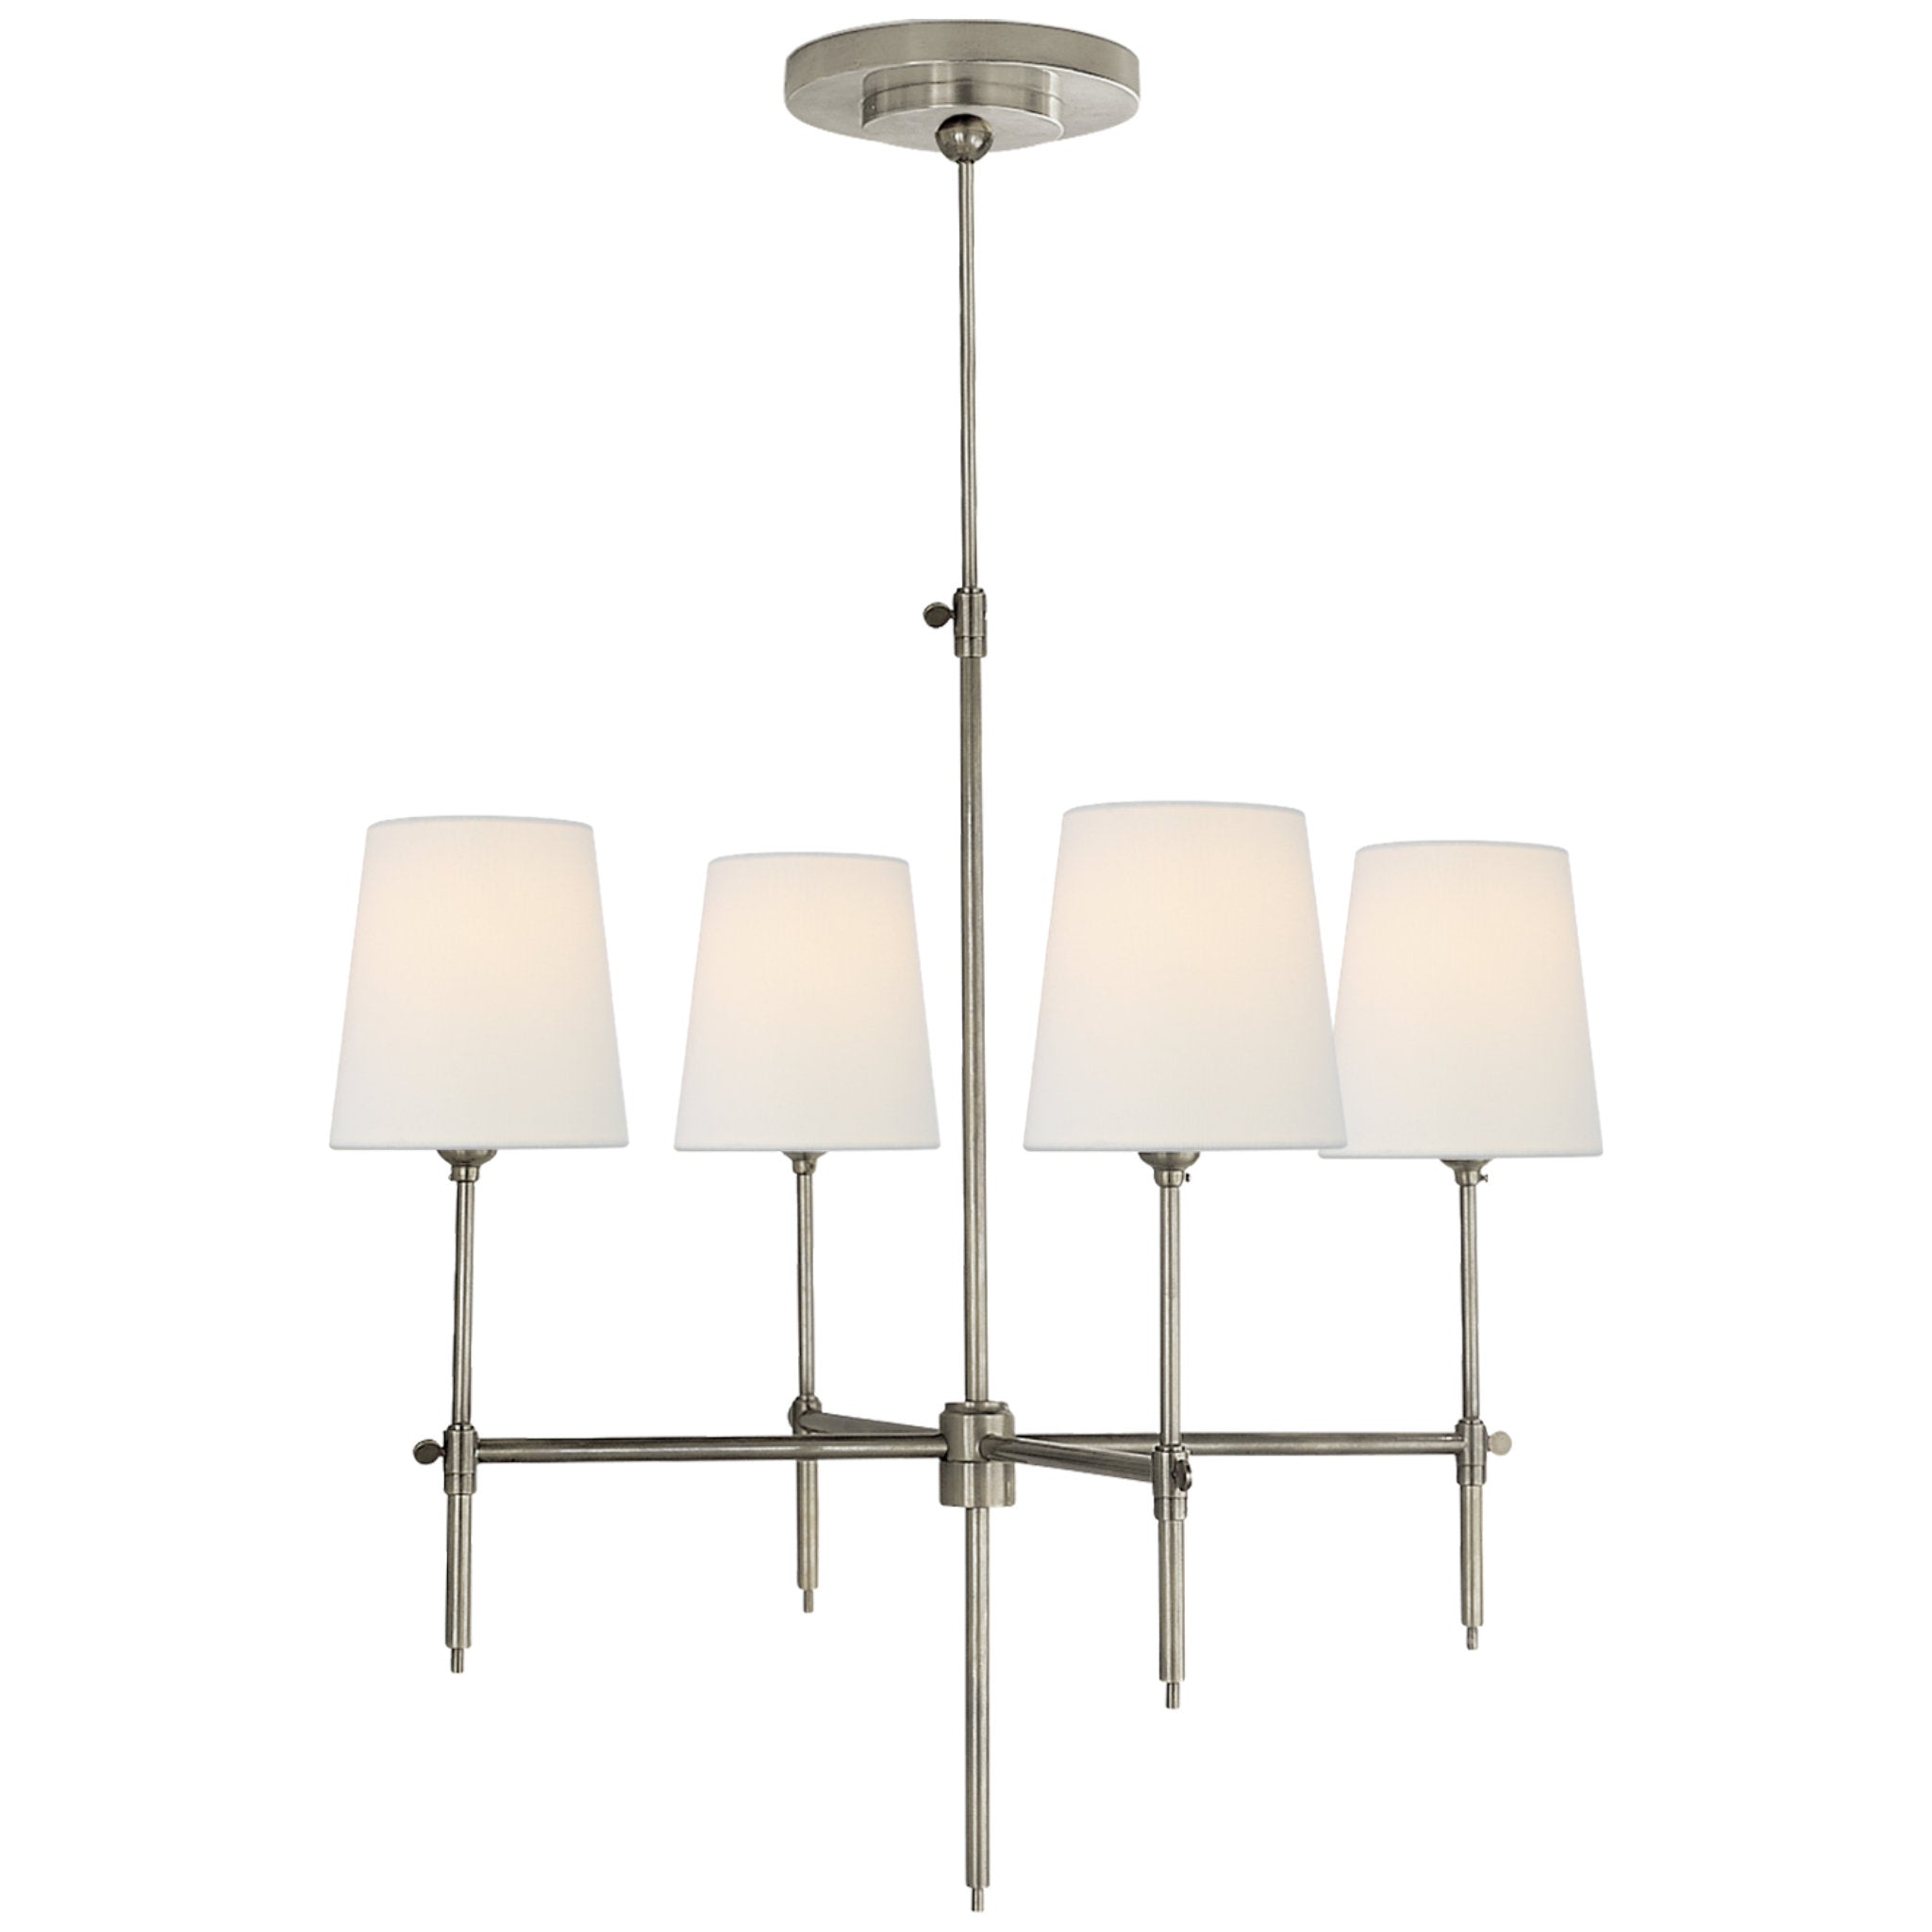 Thomas O'Brien Bryant Small Chandelier in Antique Nickel with Linen Shades